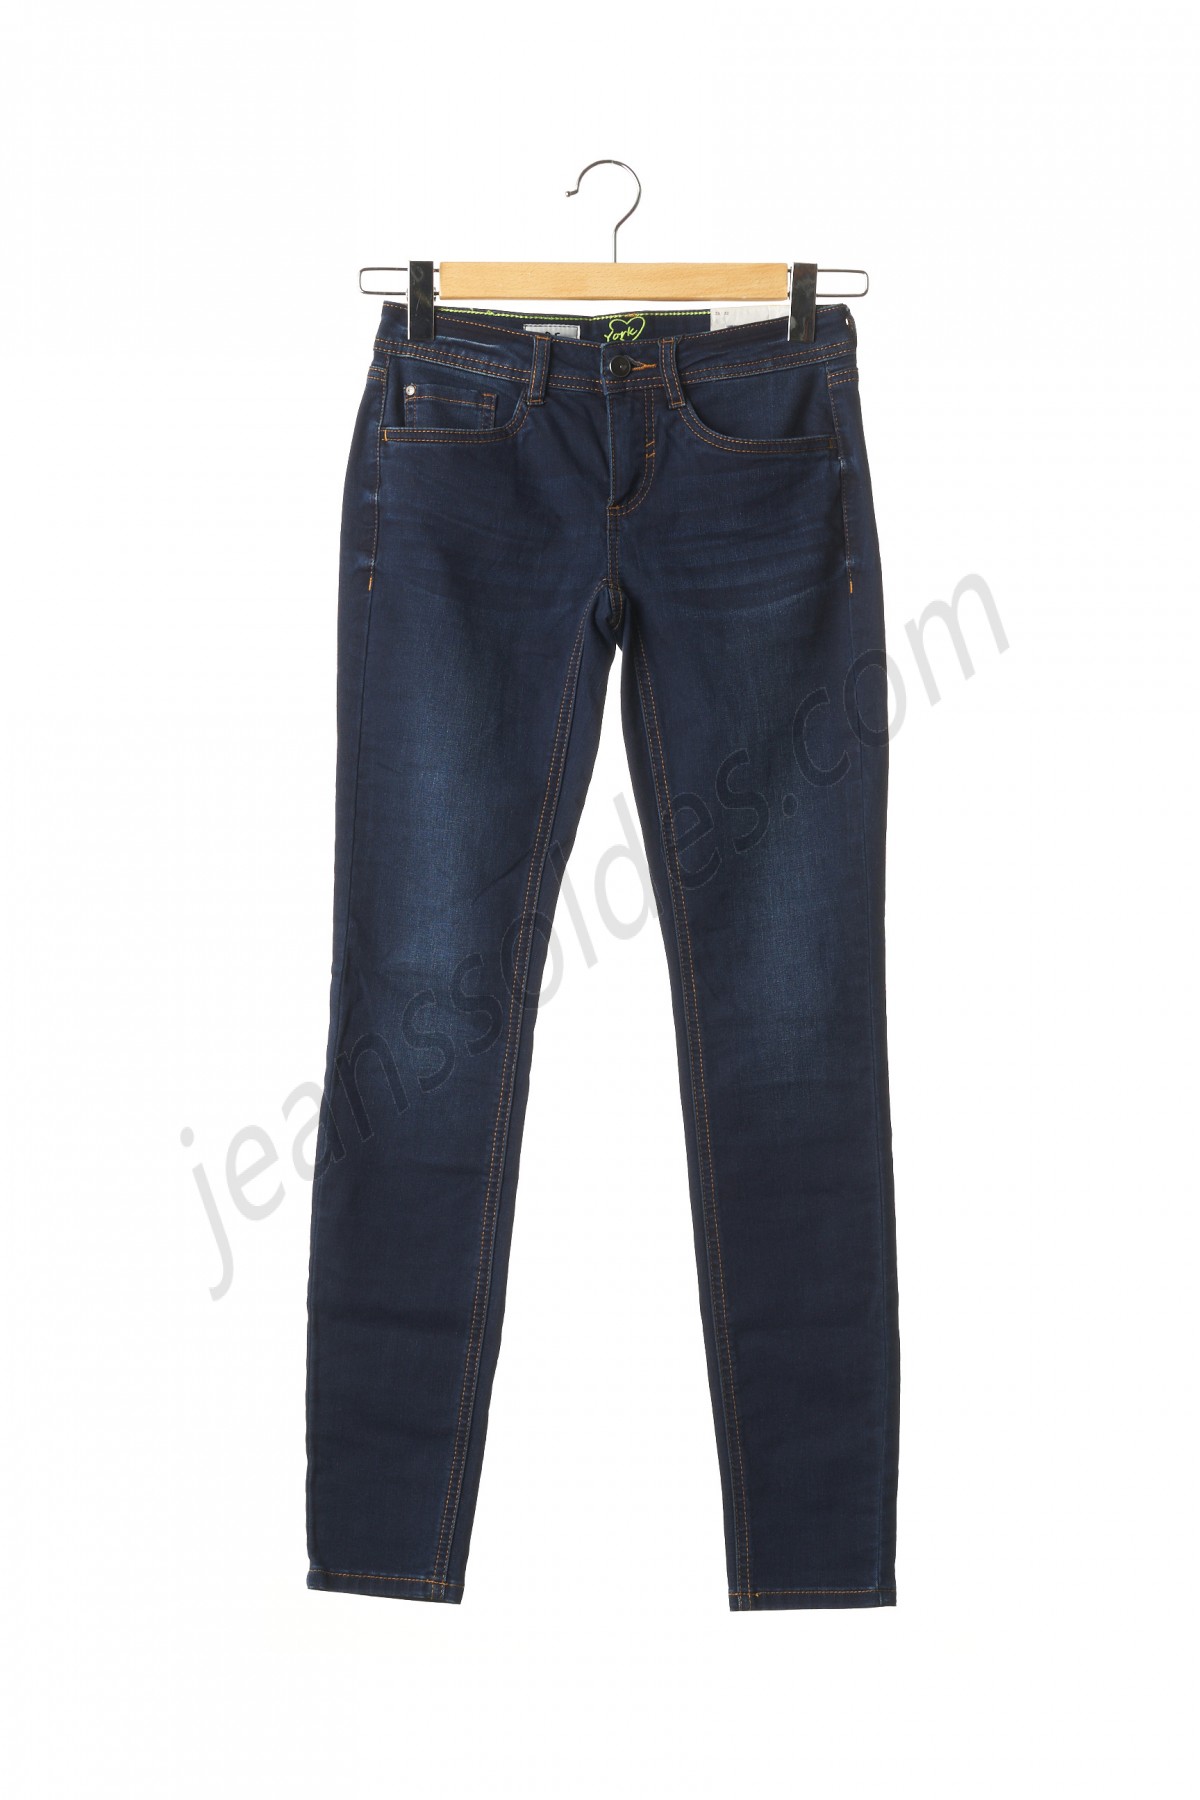 street one-Jeans coupe slim prix d’amis - -0